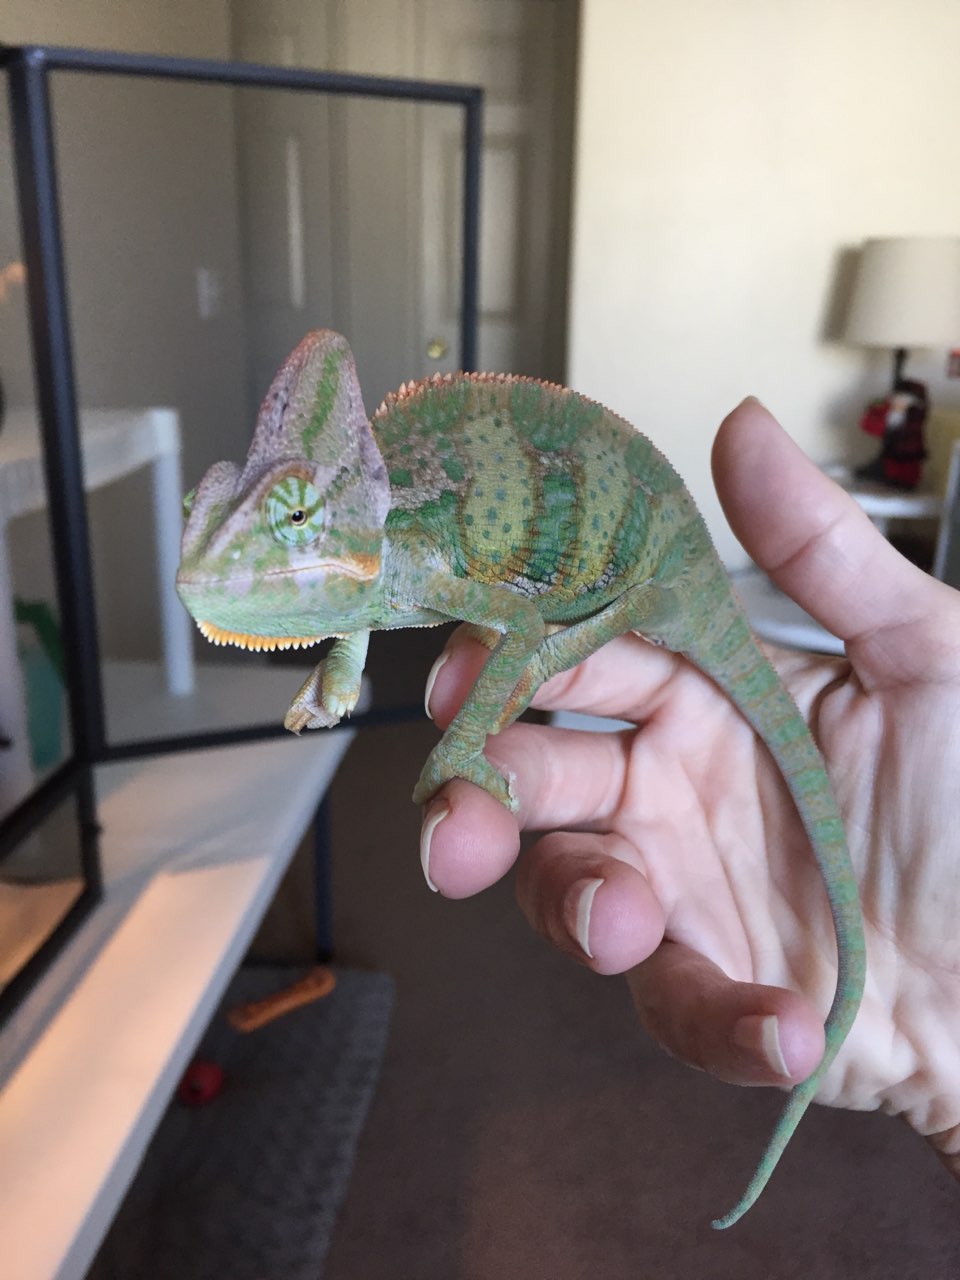 Building Trust With Your Chameleon | Chameleon Forums